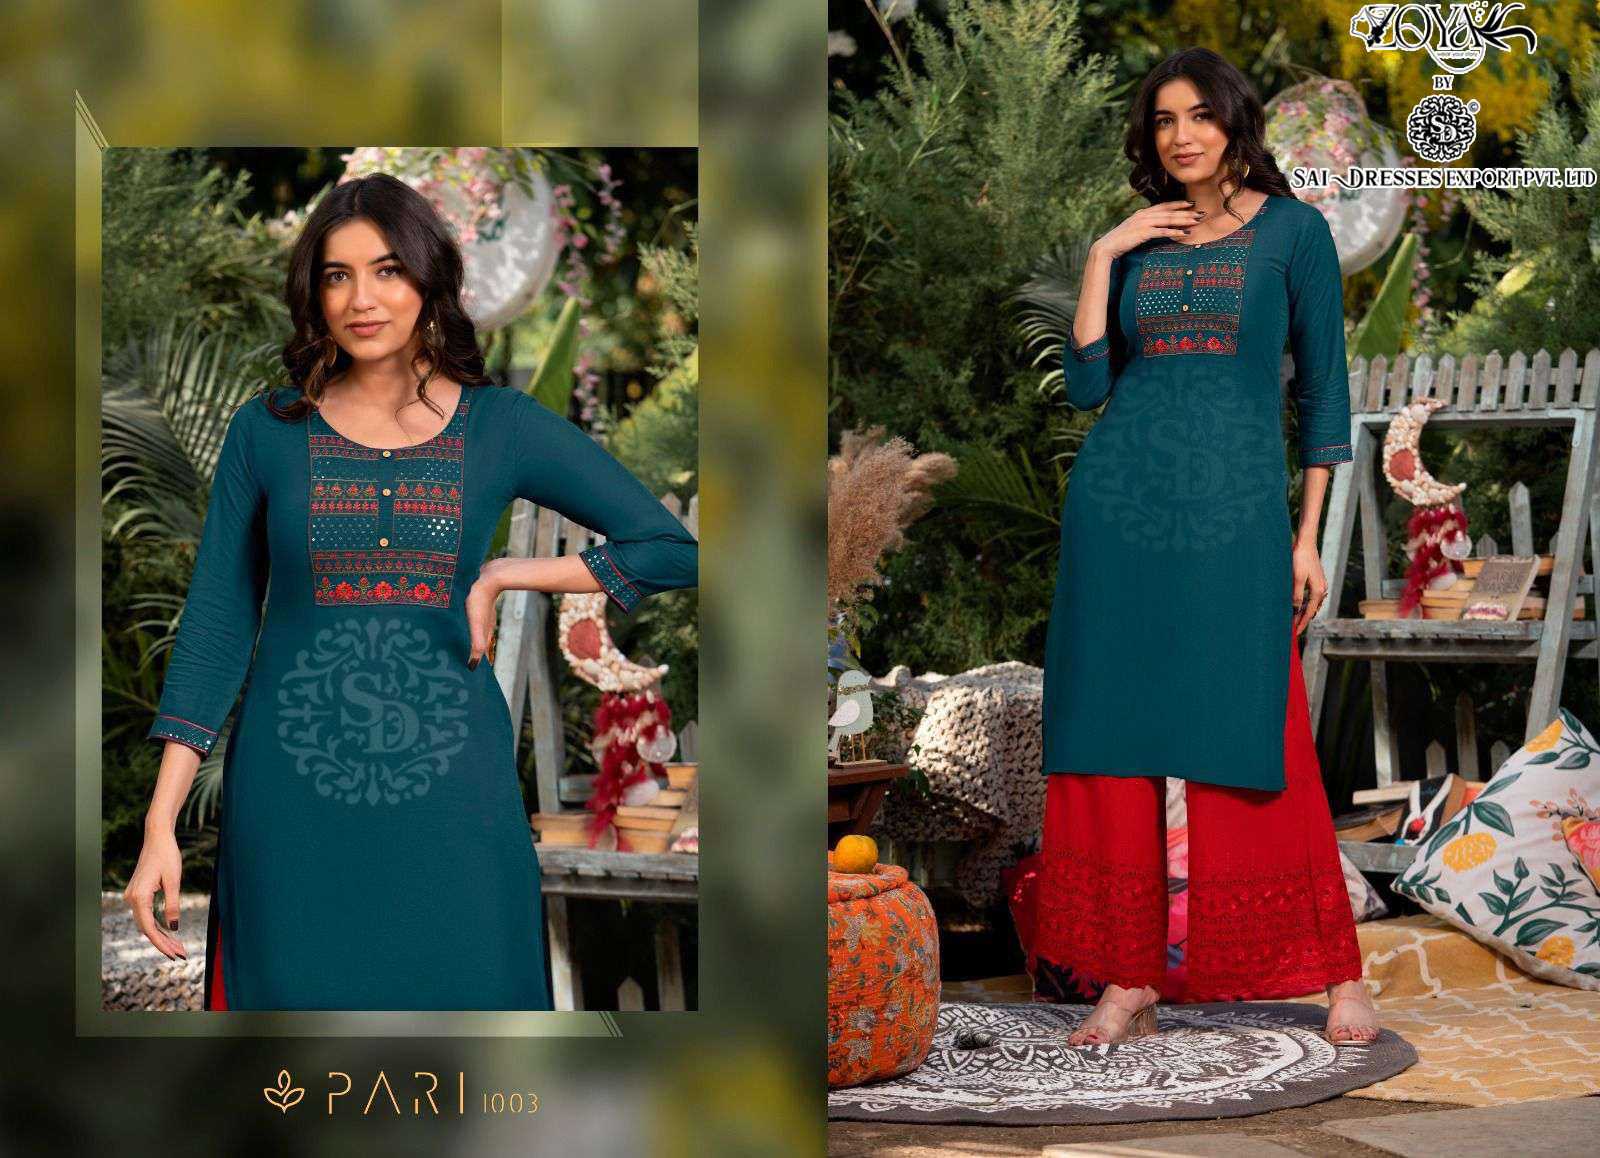 SAI DRESSES PRESENT PARI VOL 10 READY TO DAILY WEAR FANCY KURTI COLLECTION IN WHOLESALE RATE IN SURAT